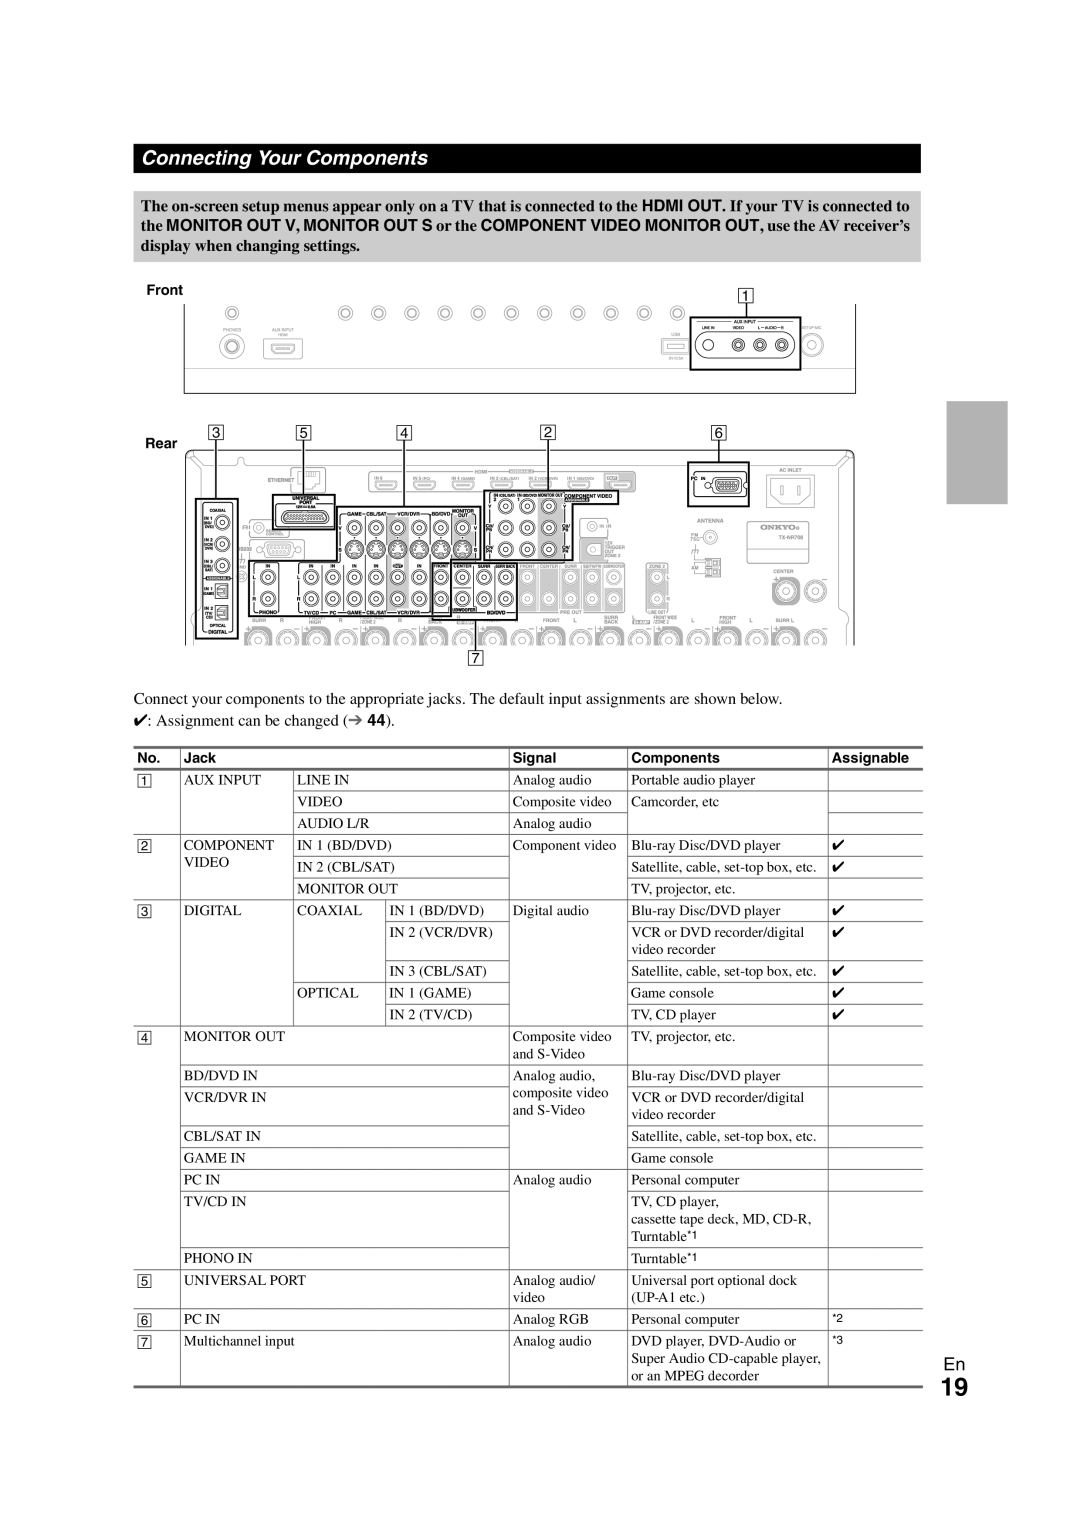 Onkyo TX-NR708 instruction manual Connecting Your Components, display when changing settings 